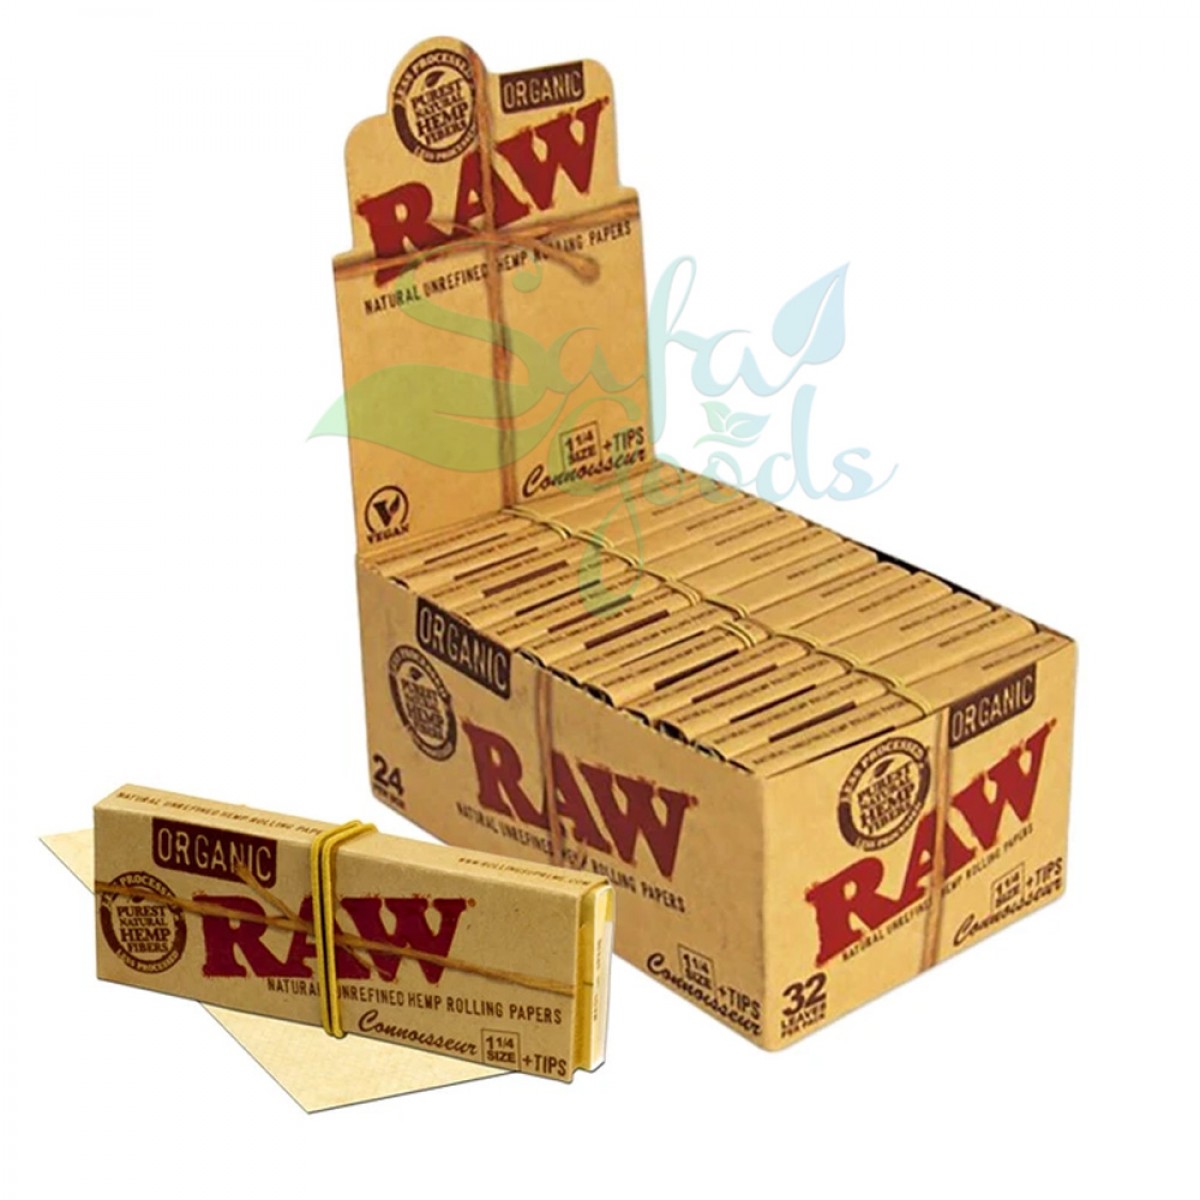 RAW - Organic Connoisseur Rolling Papers - 1-1/4in.